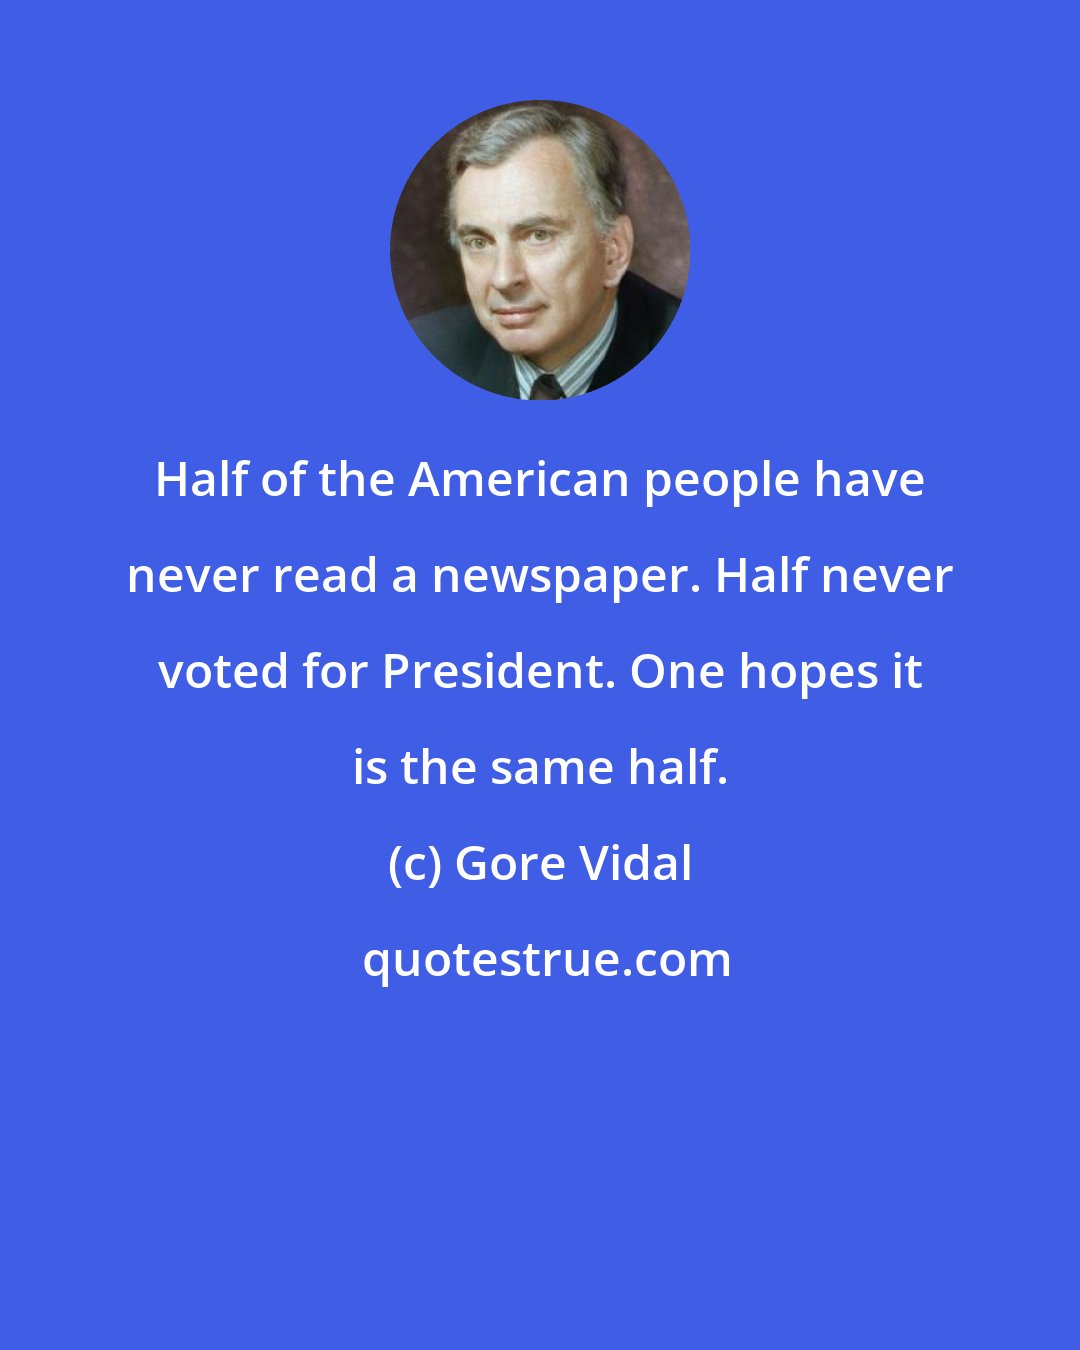 Gore Vidal: Half of the American people have never read a newspaper. Half never voted for President. One hopes it is the same half.